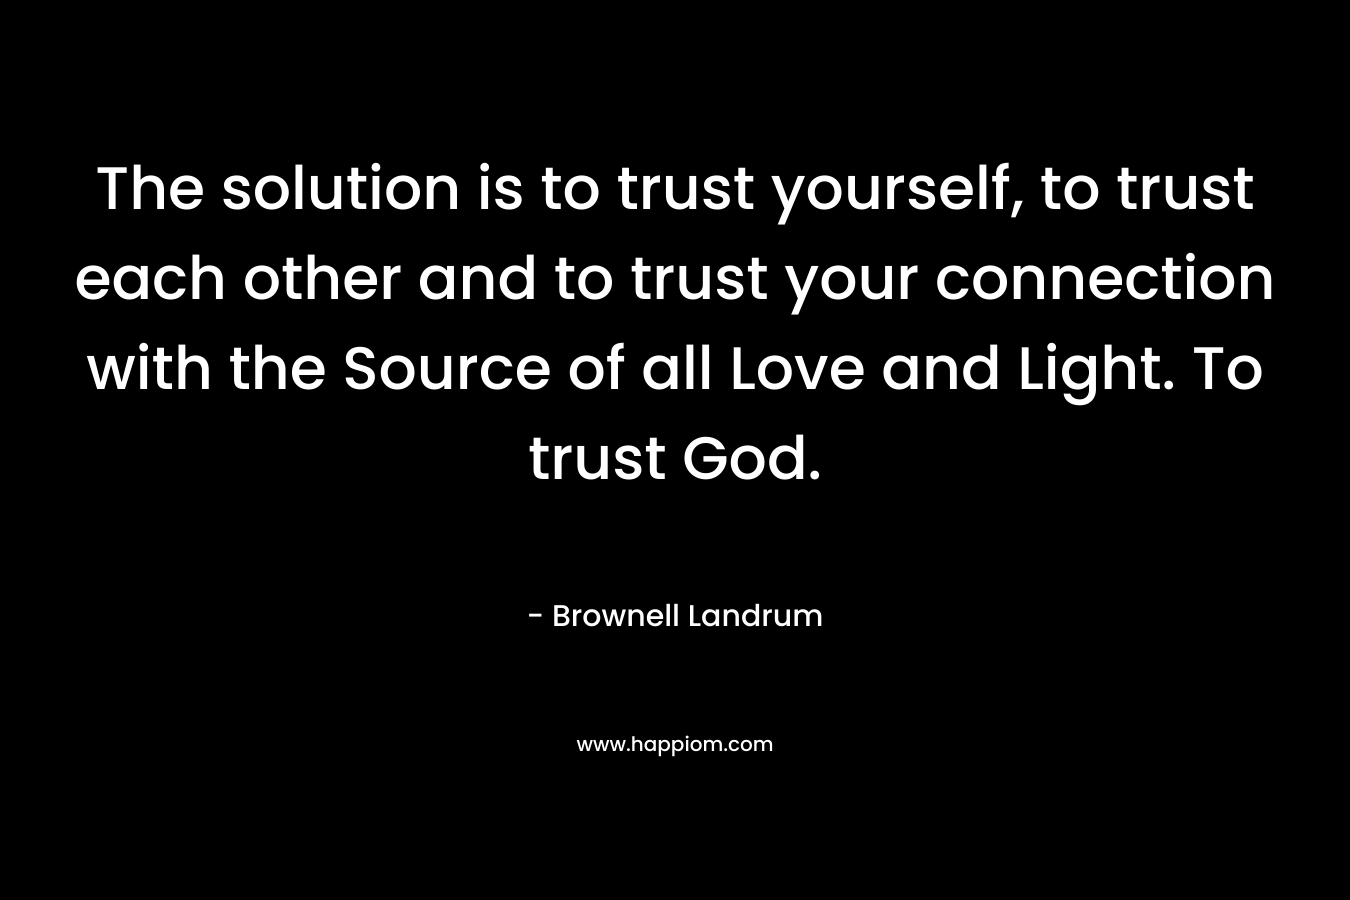 The solution is to trust yourself, to trust each other and to trust your connection with the Source of all Love and Light. To trust God.